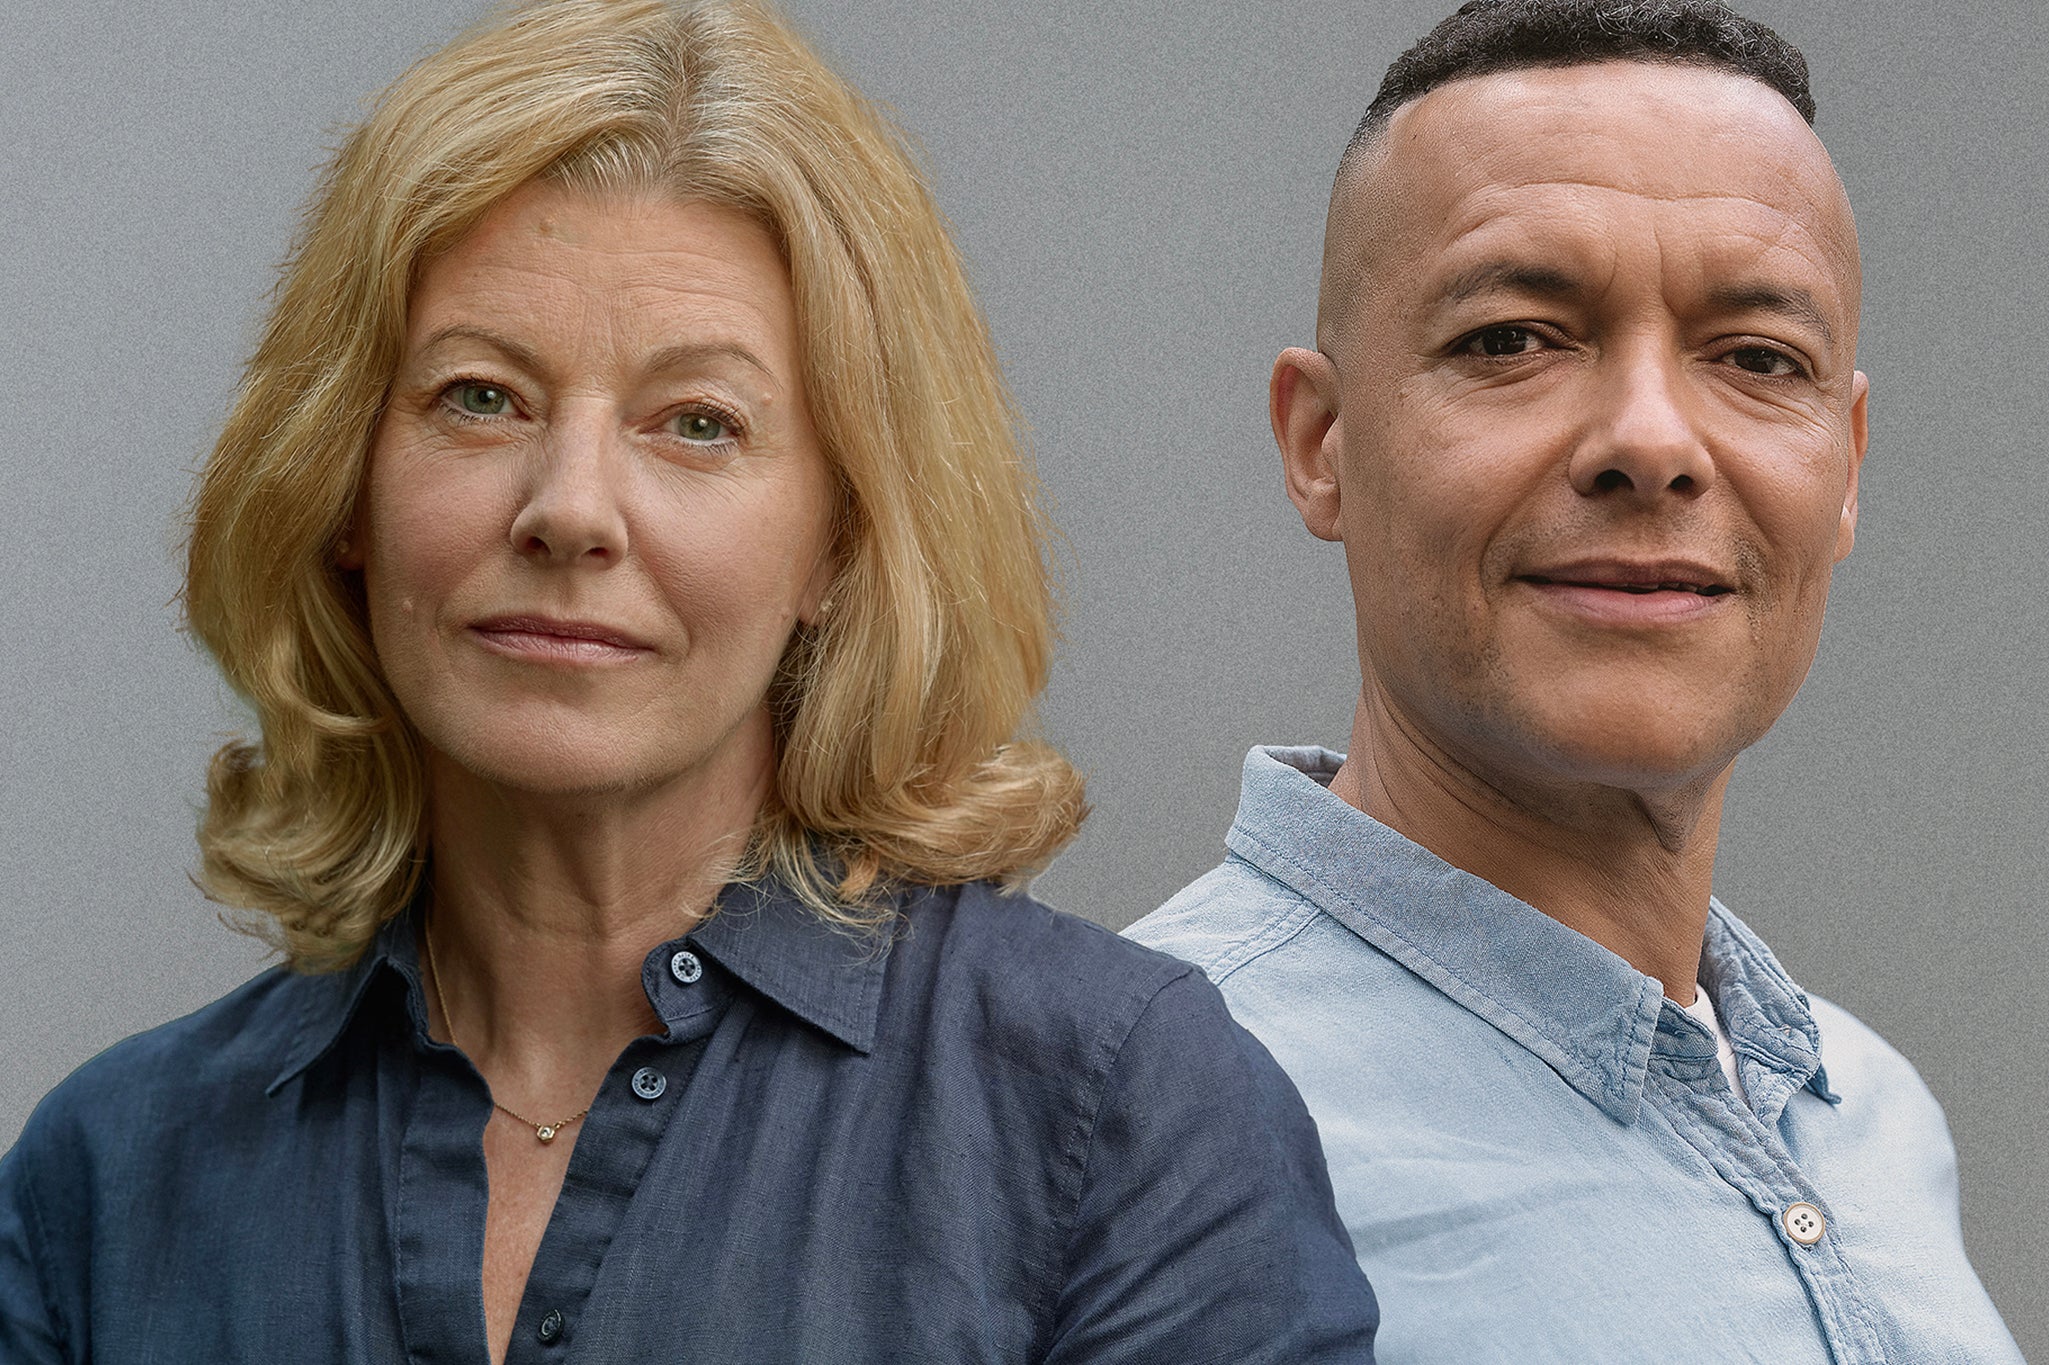 The journalist Laura Trevelyan and the Labour MP Clive Lewis, who have joined together to fight for reparations